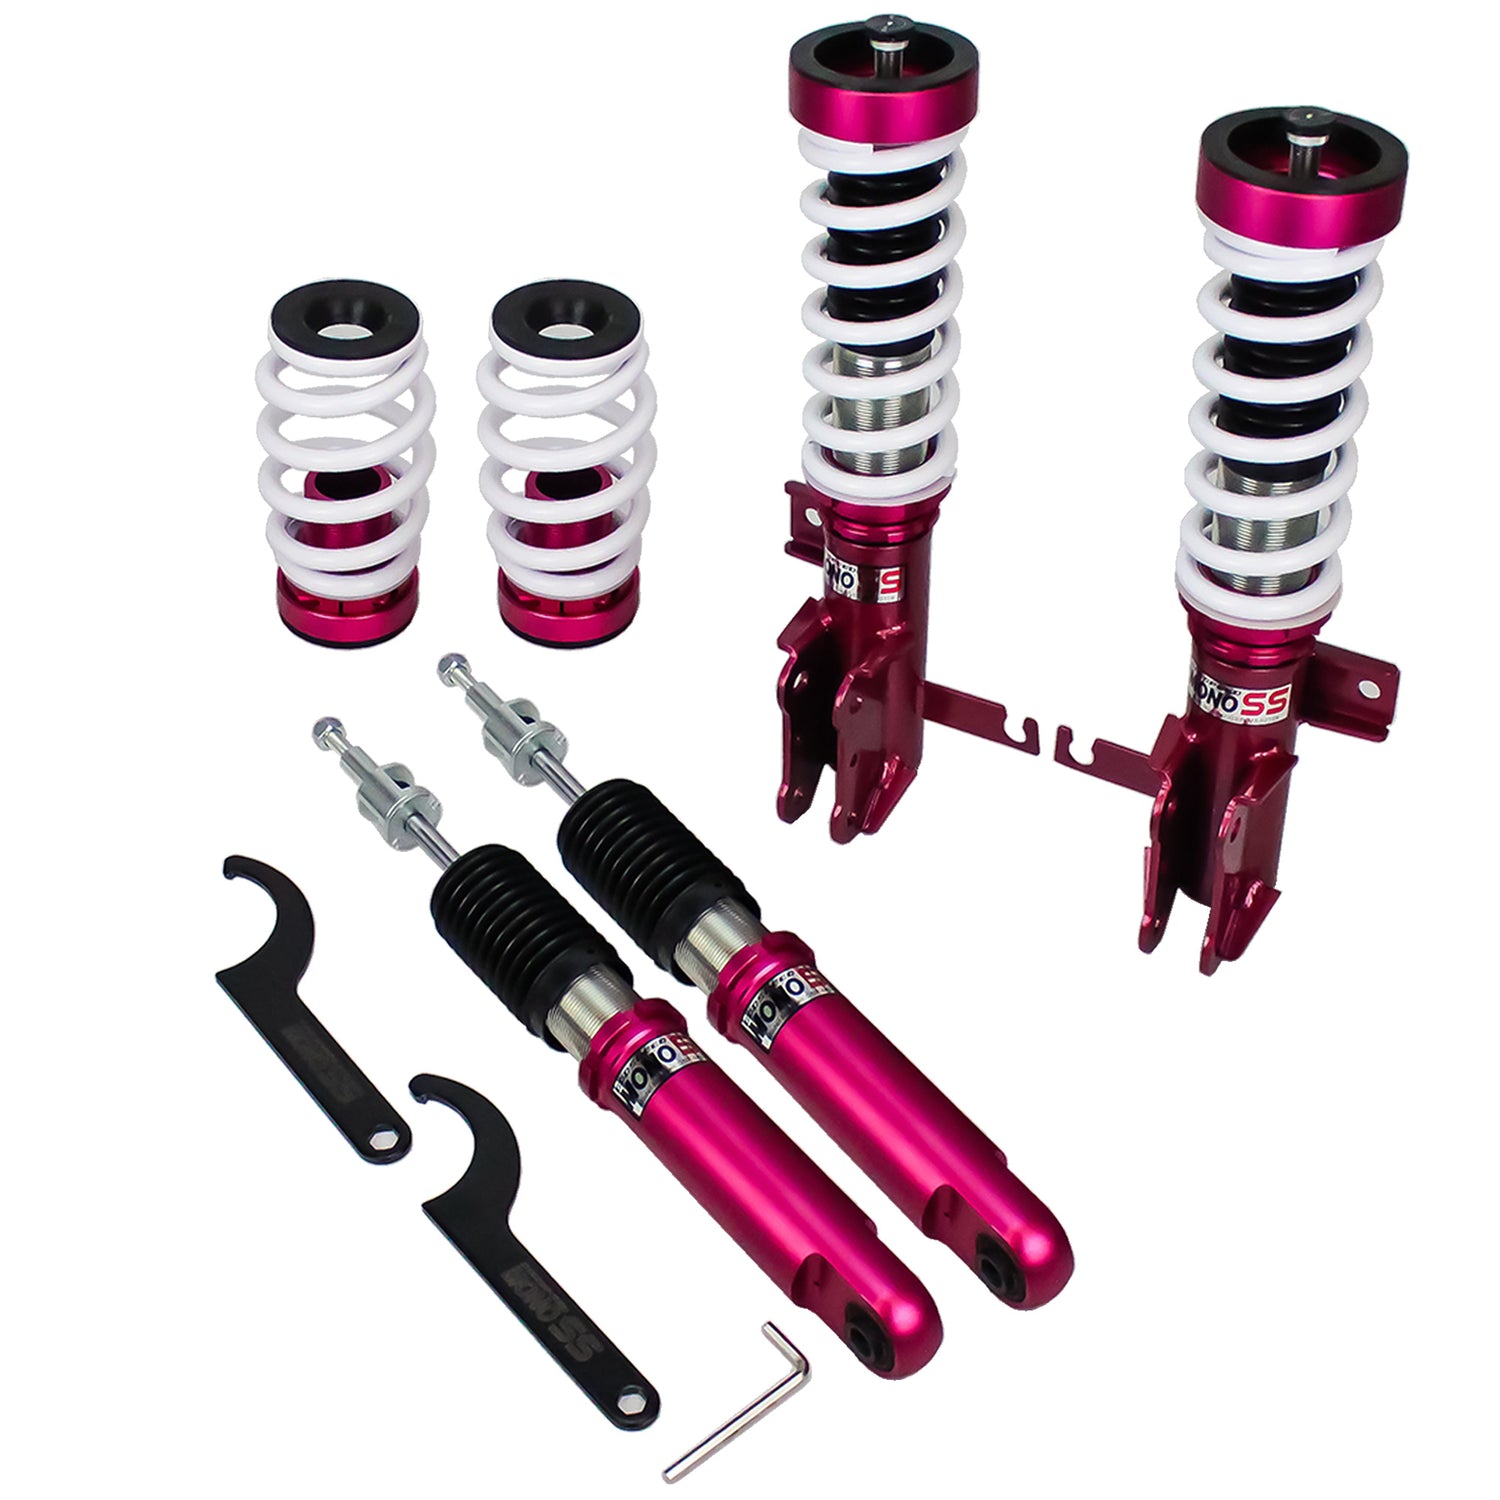 Godspeed MSS0106 MonoSS Coilover Lowering Kit, Fully Adjustable, Ride Height, Spring Tension And 16 Click Damping, Buick Verano 2012-17